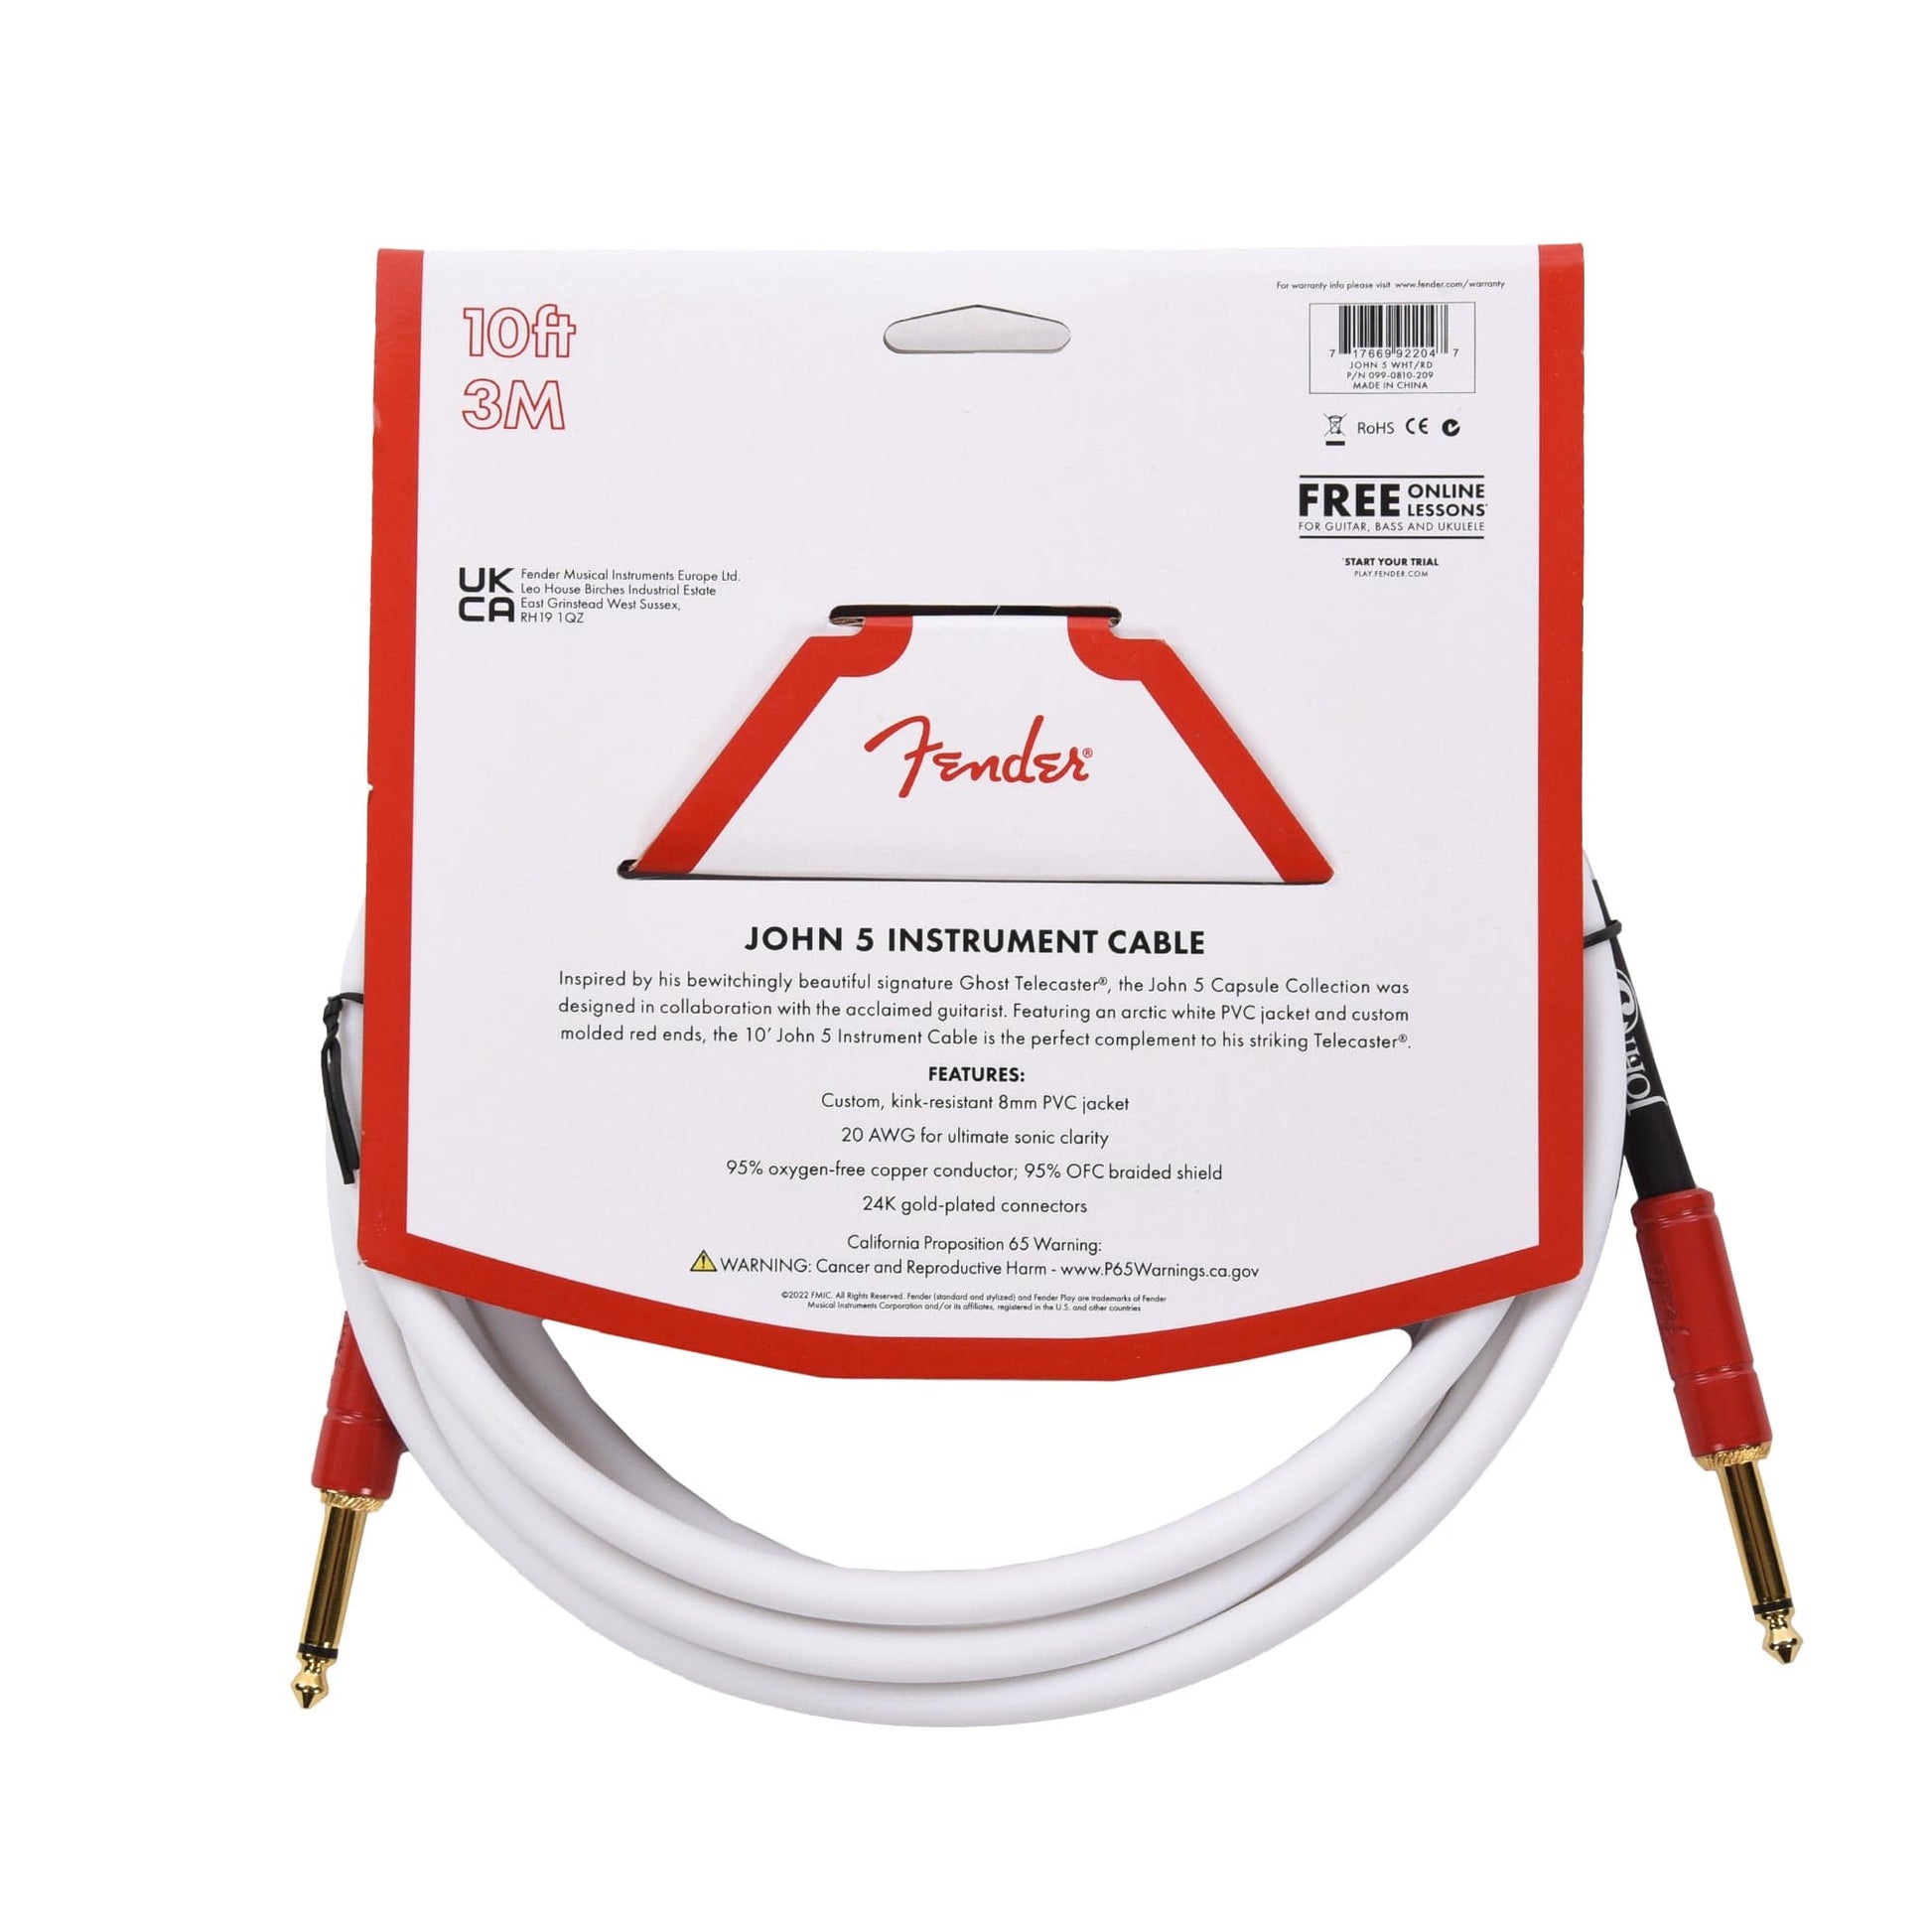 Fender John 5 10' Instrument Cable White/Red Accessories / Cables